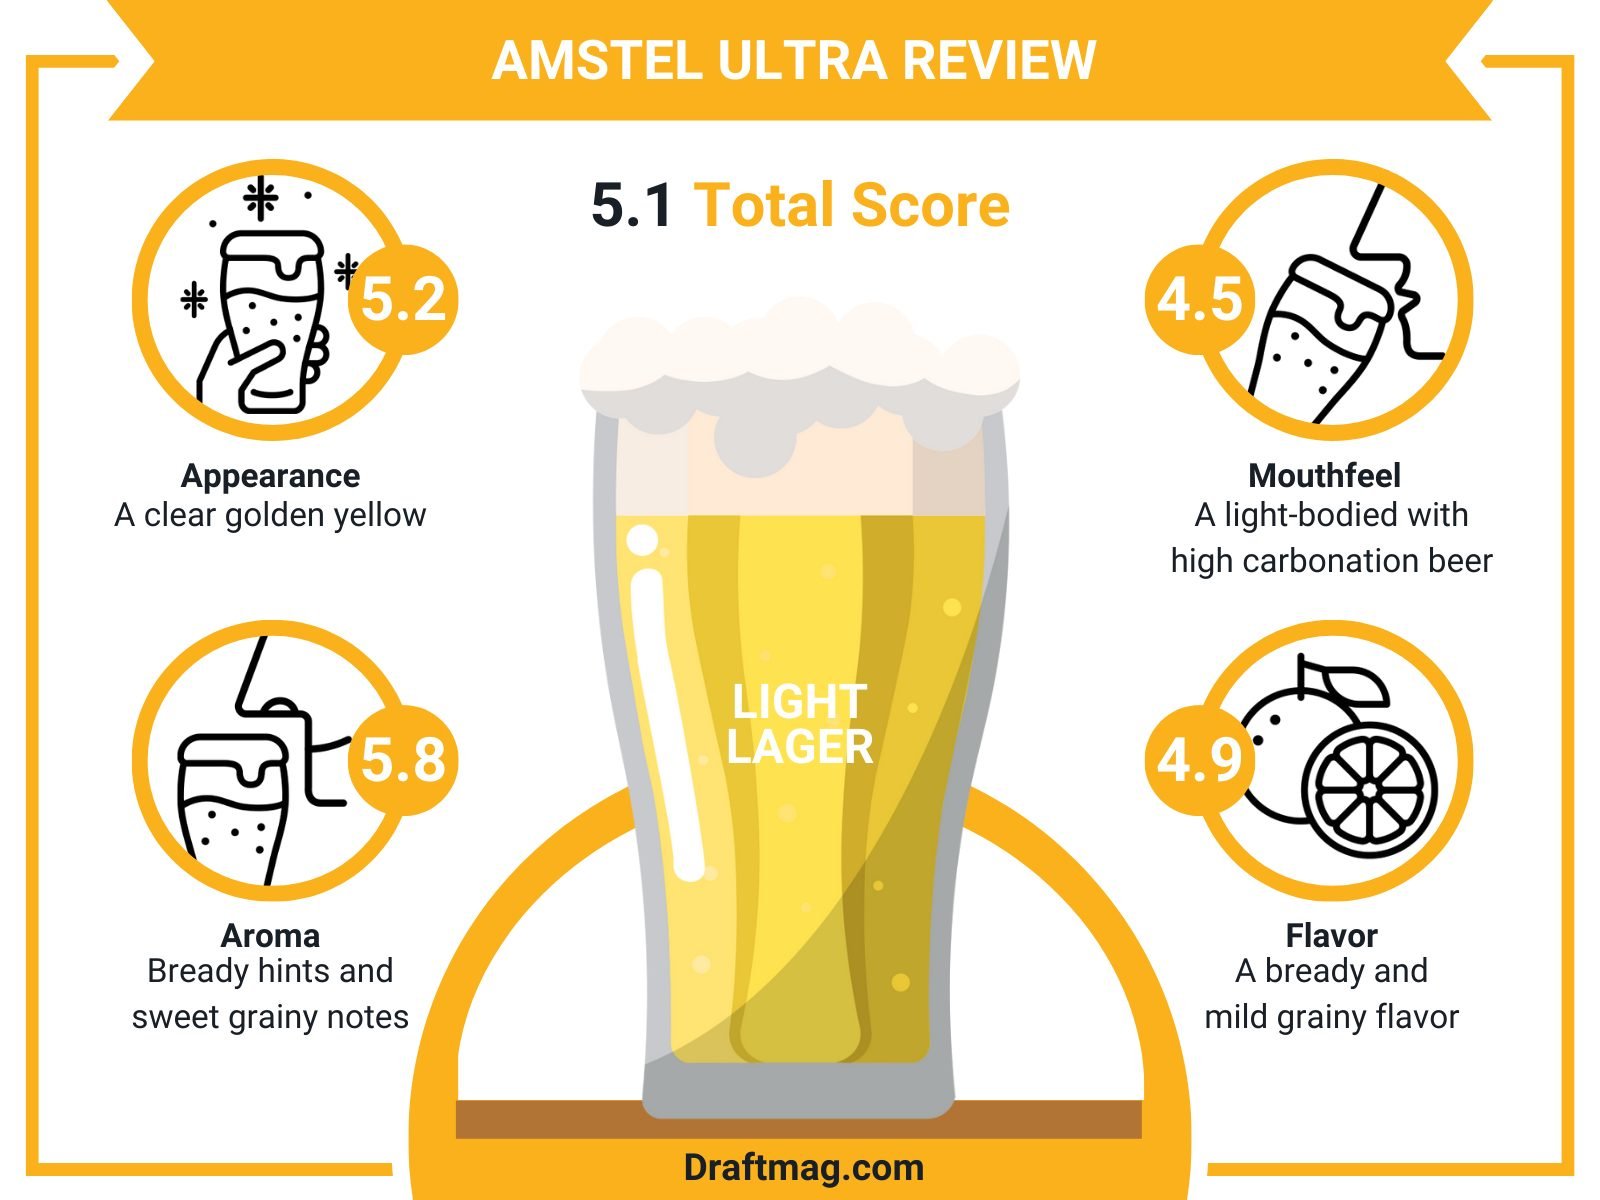 Amstel Ultra Review Infographic